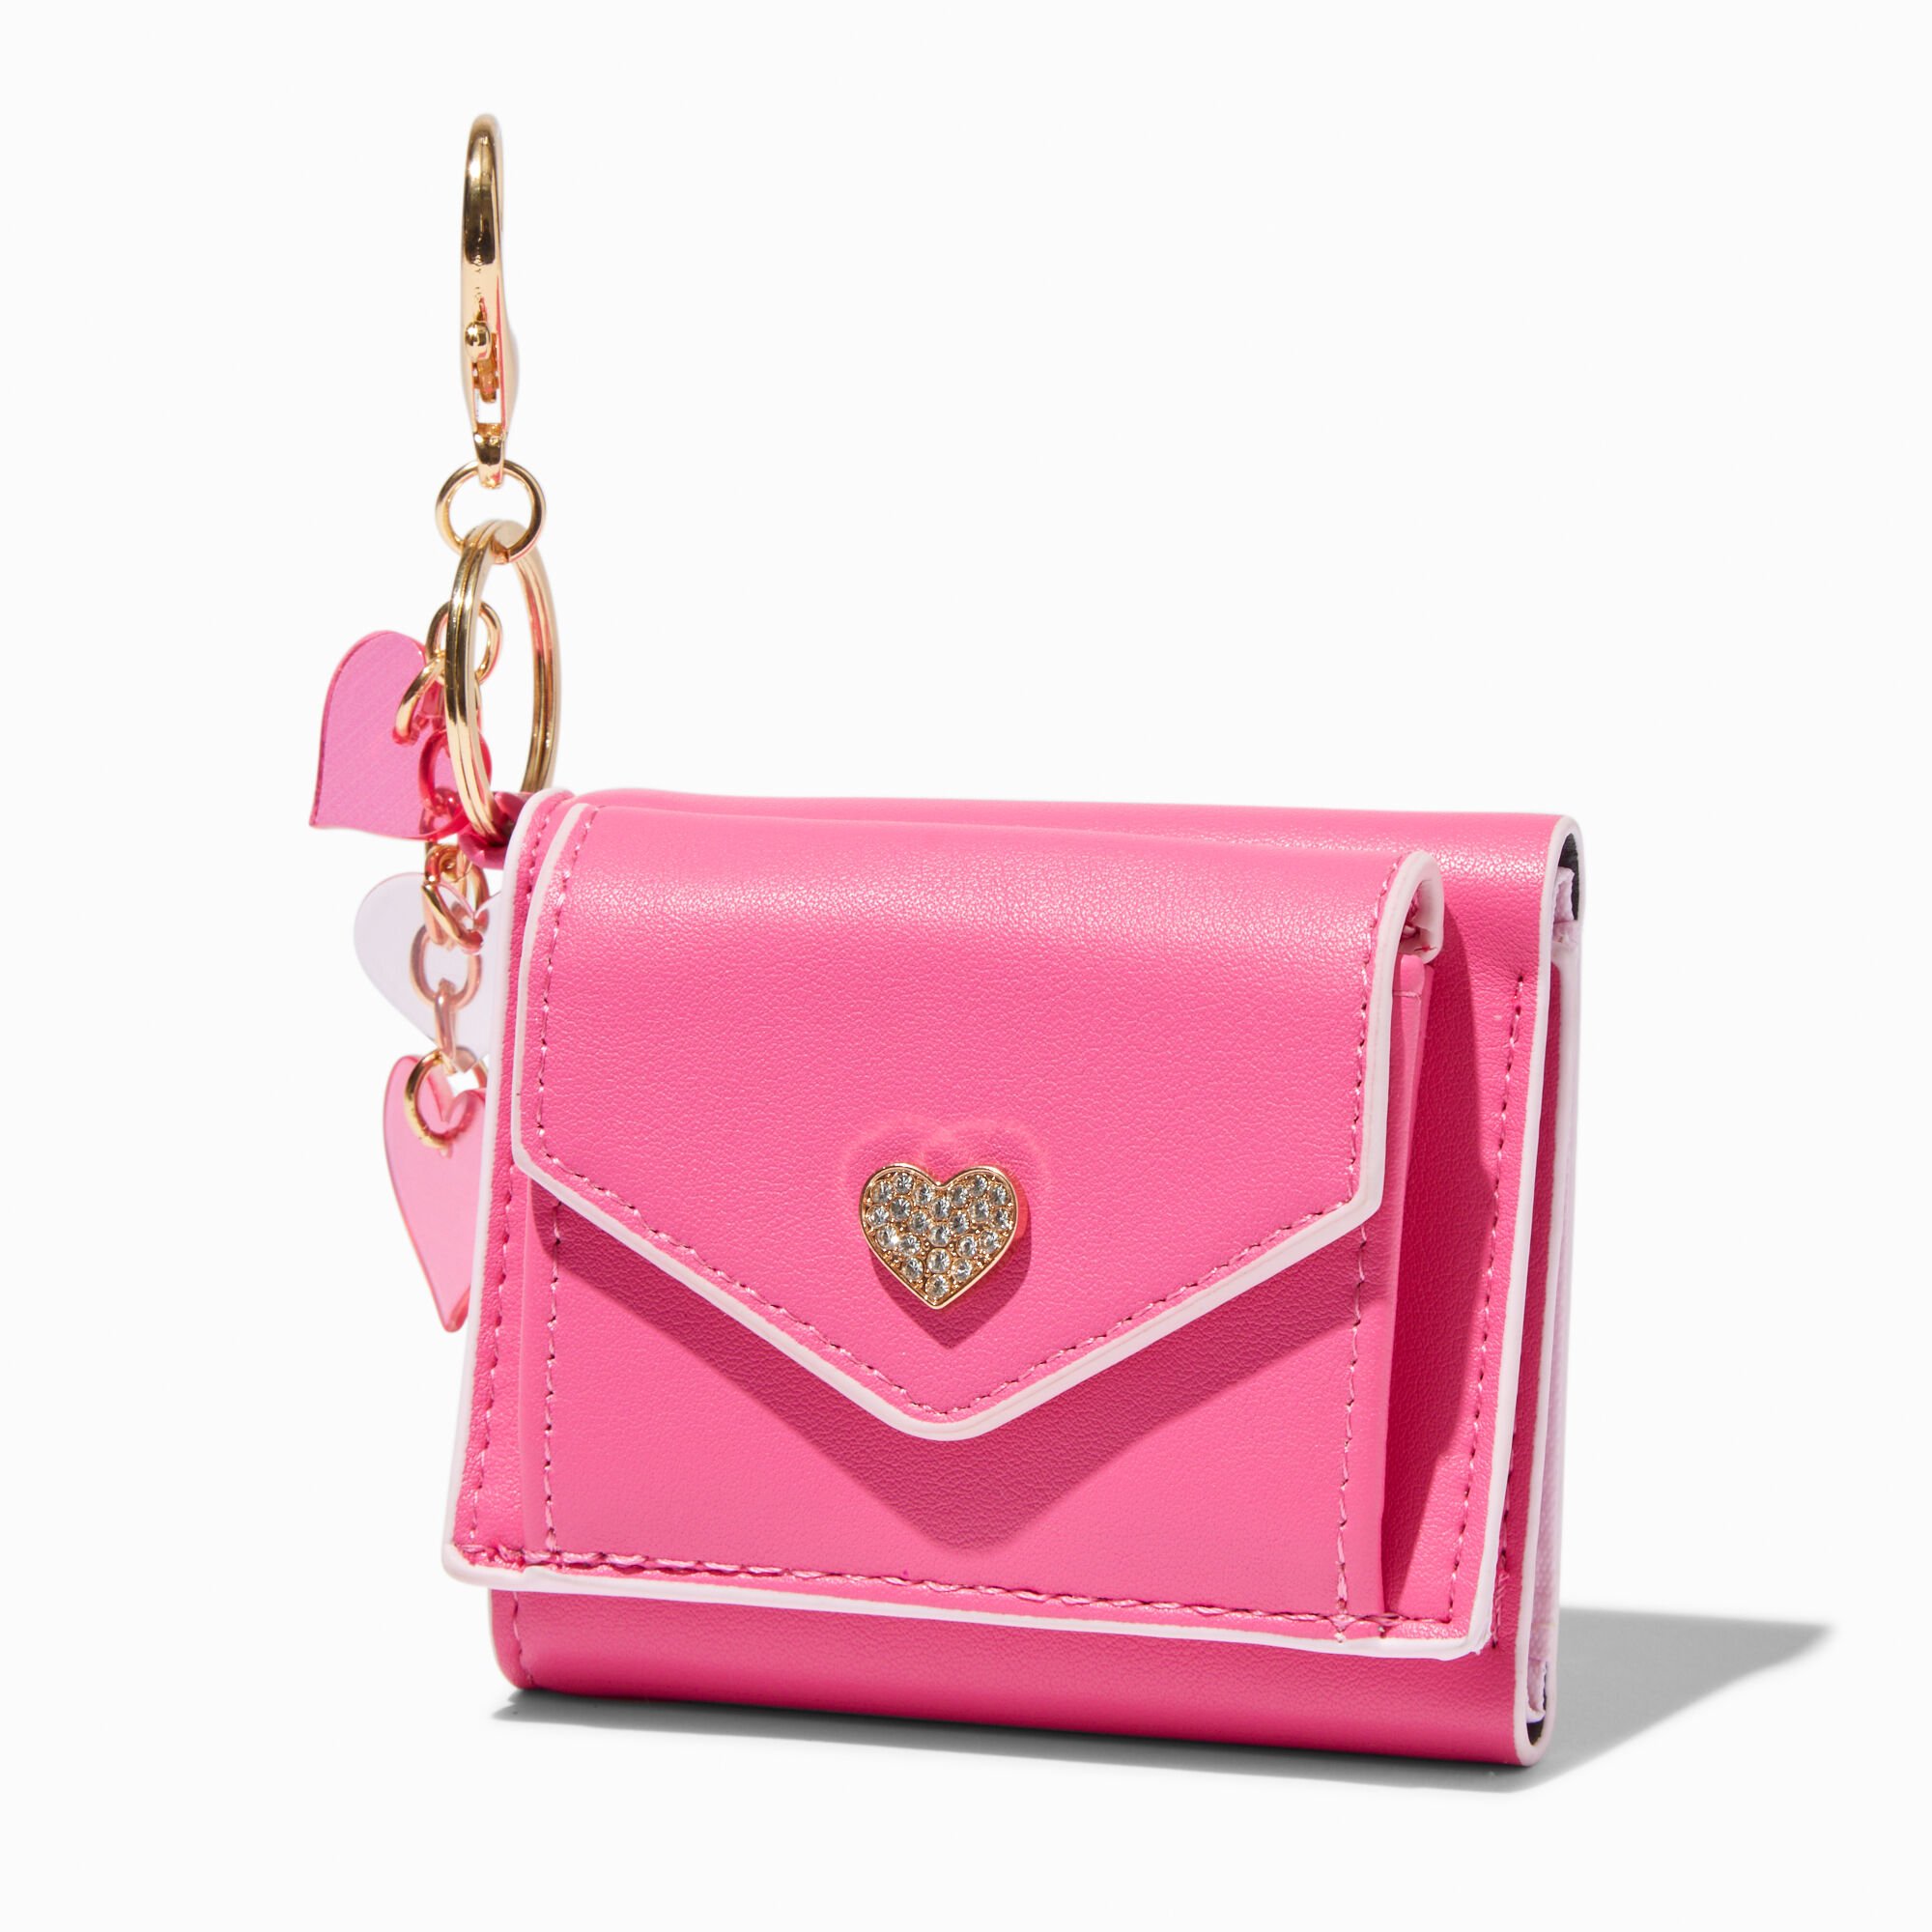 View Claires Heart Emblem Bright Trifold Wallet Pink information